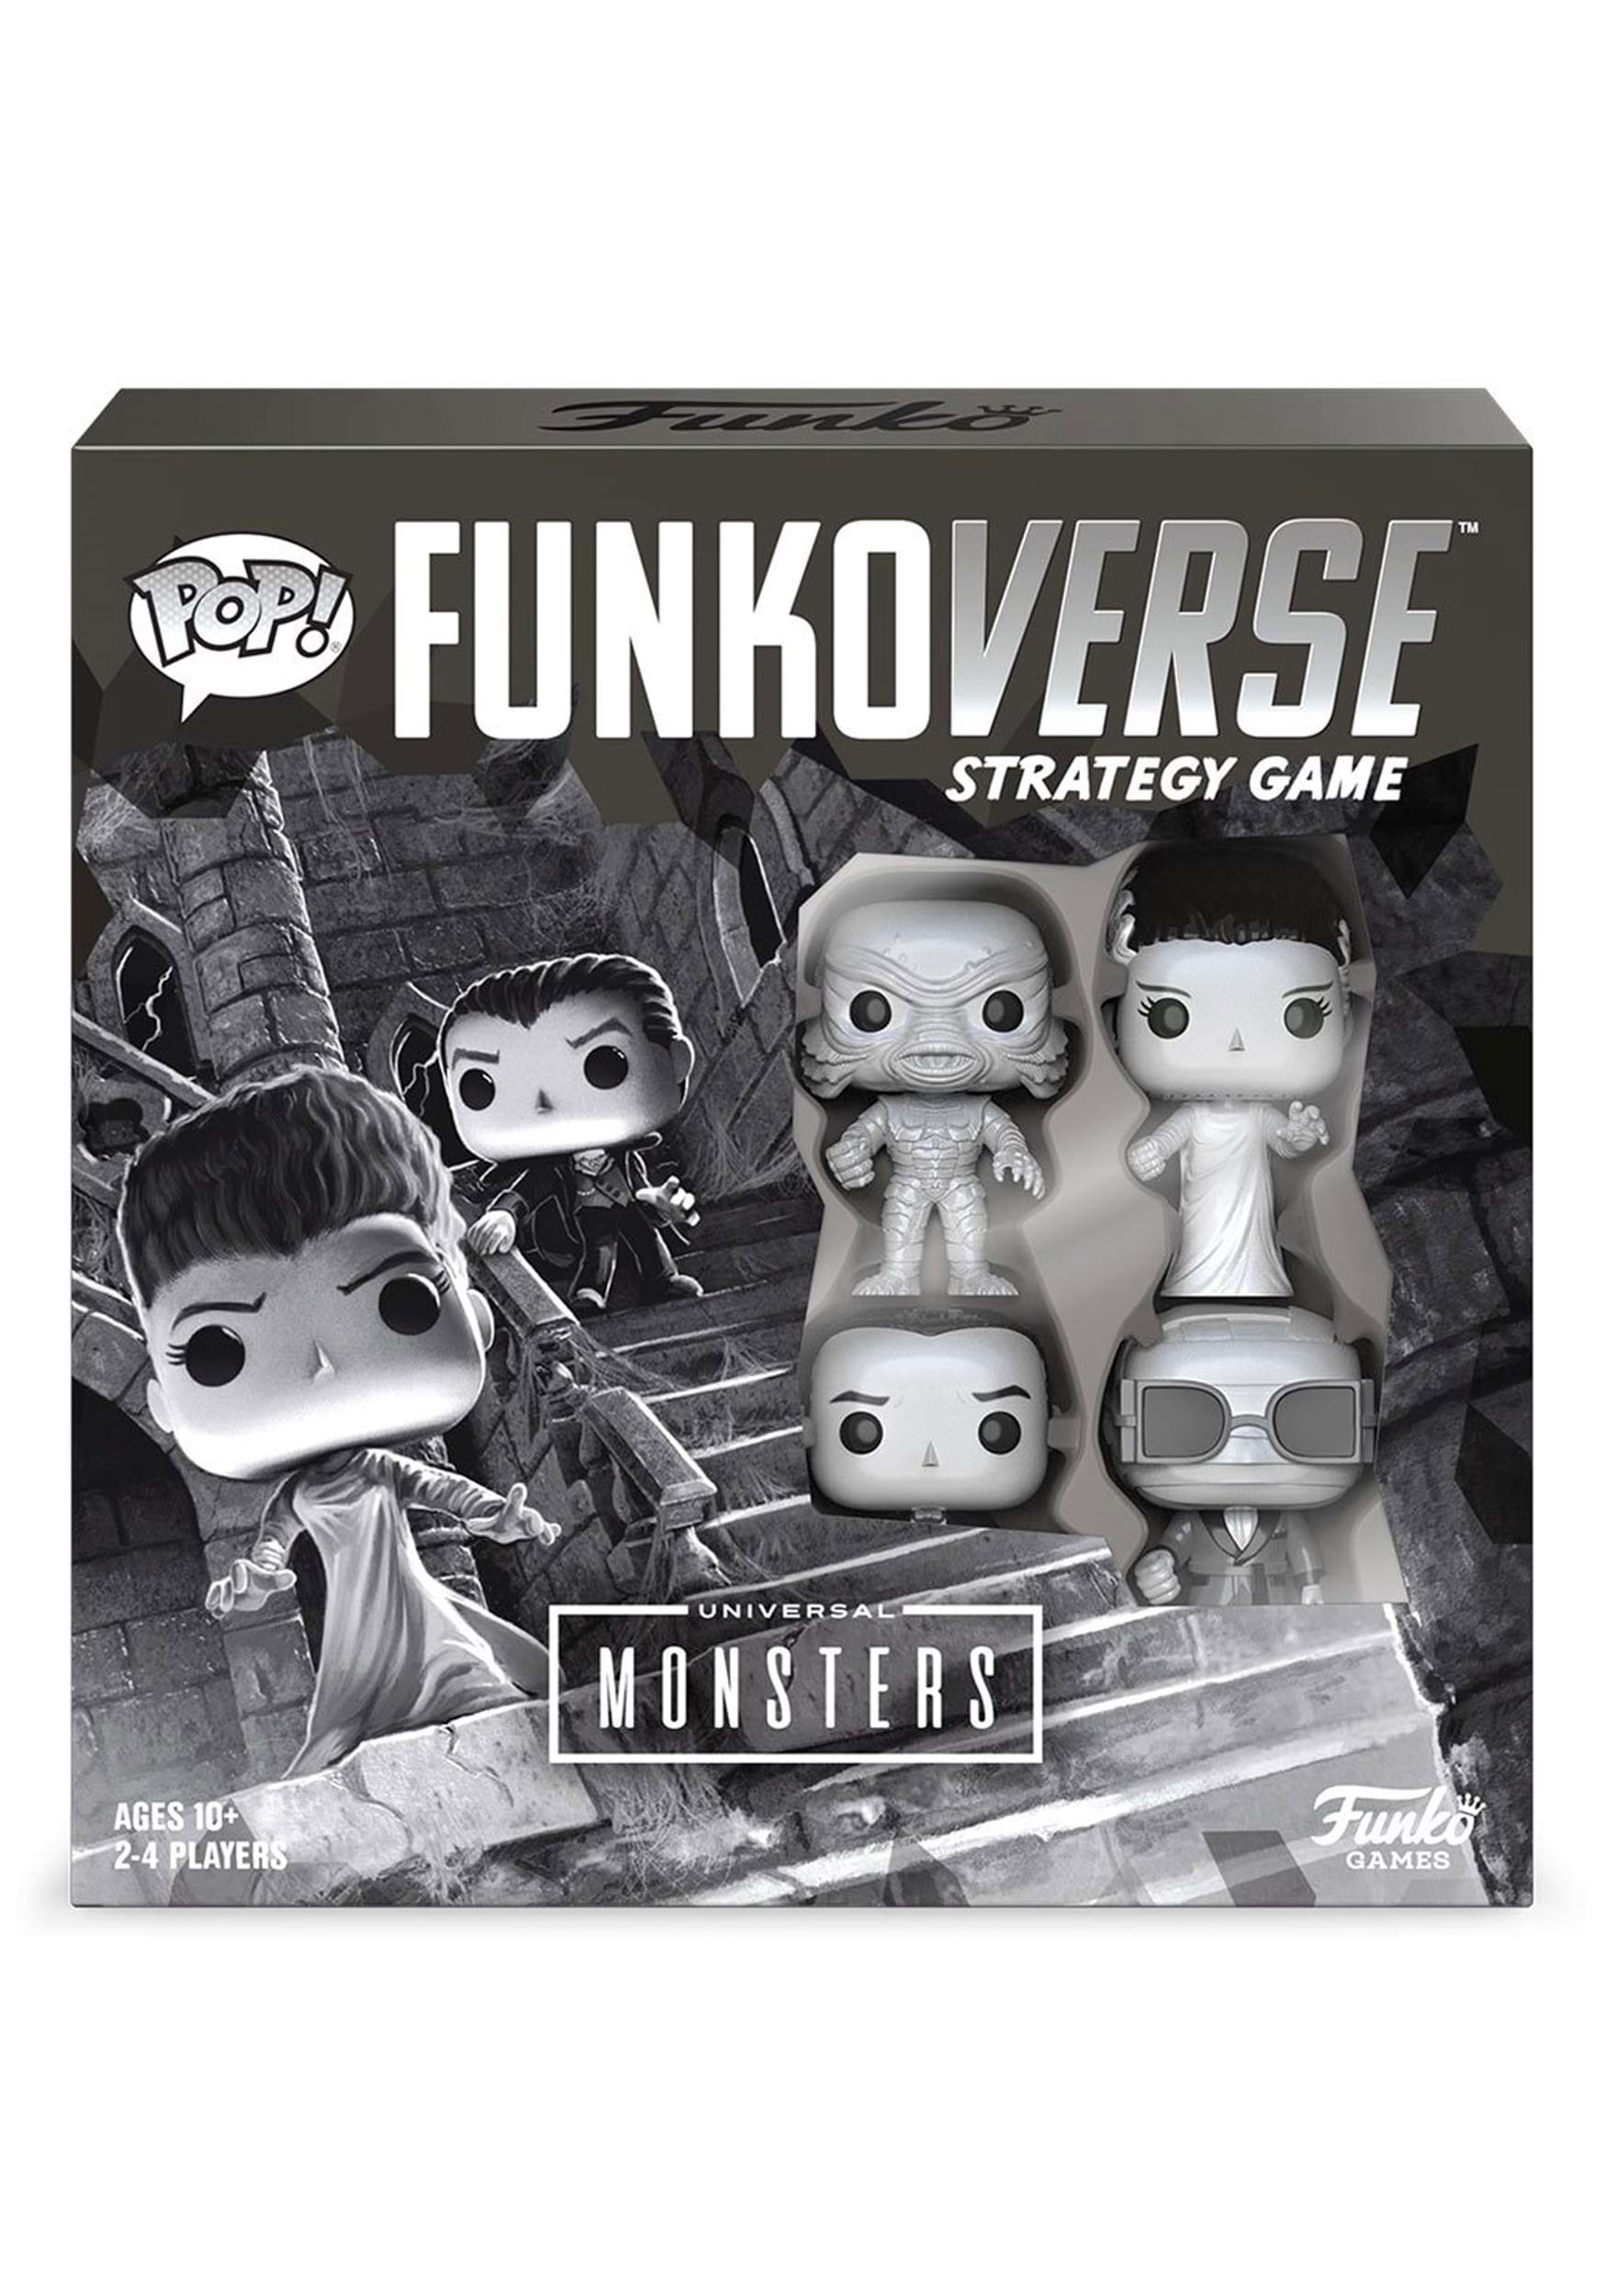 Universal Monsters 100 4-Pack Funkoverse Strategy Game